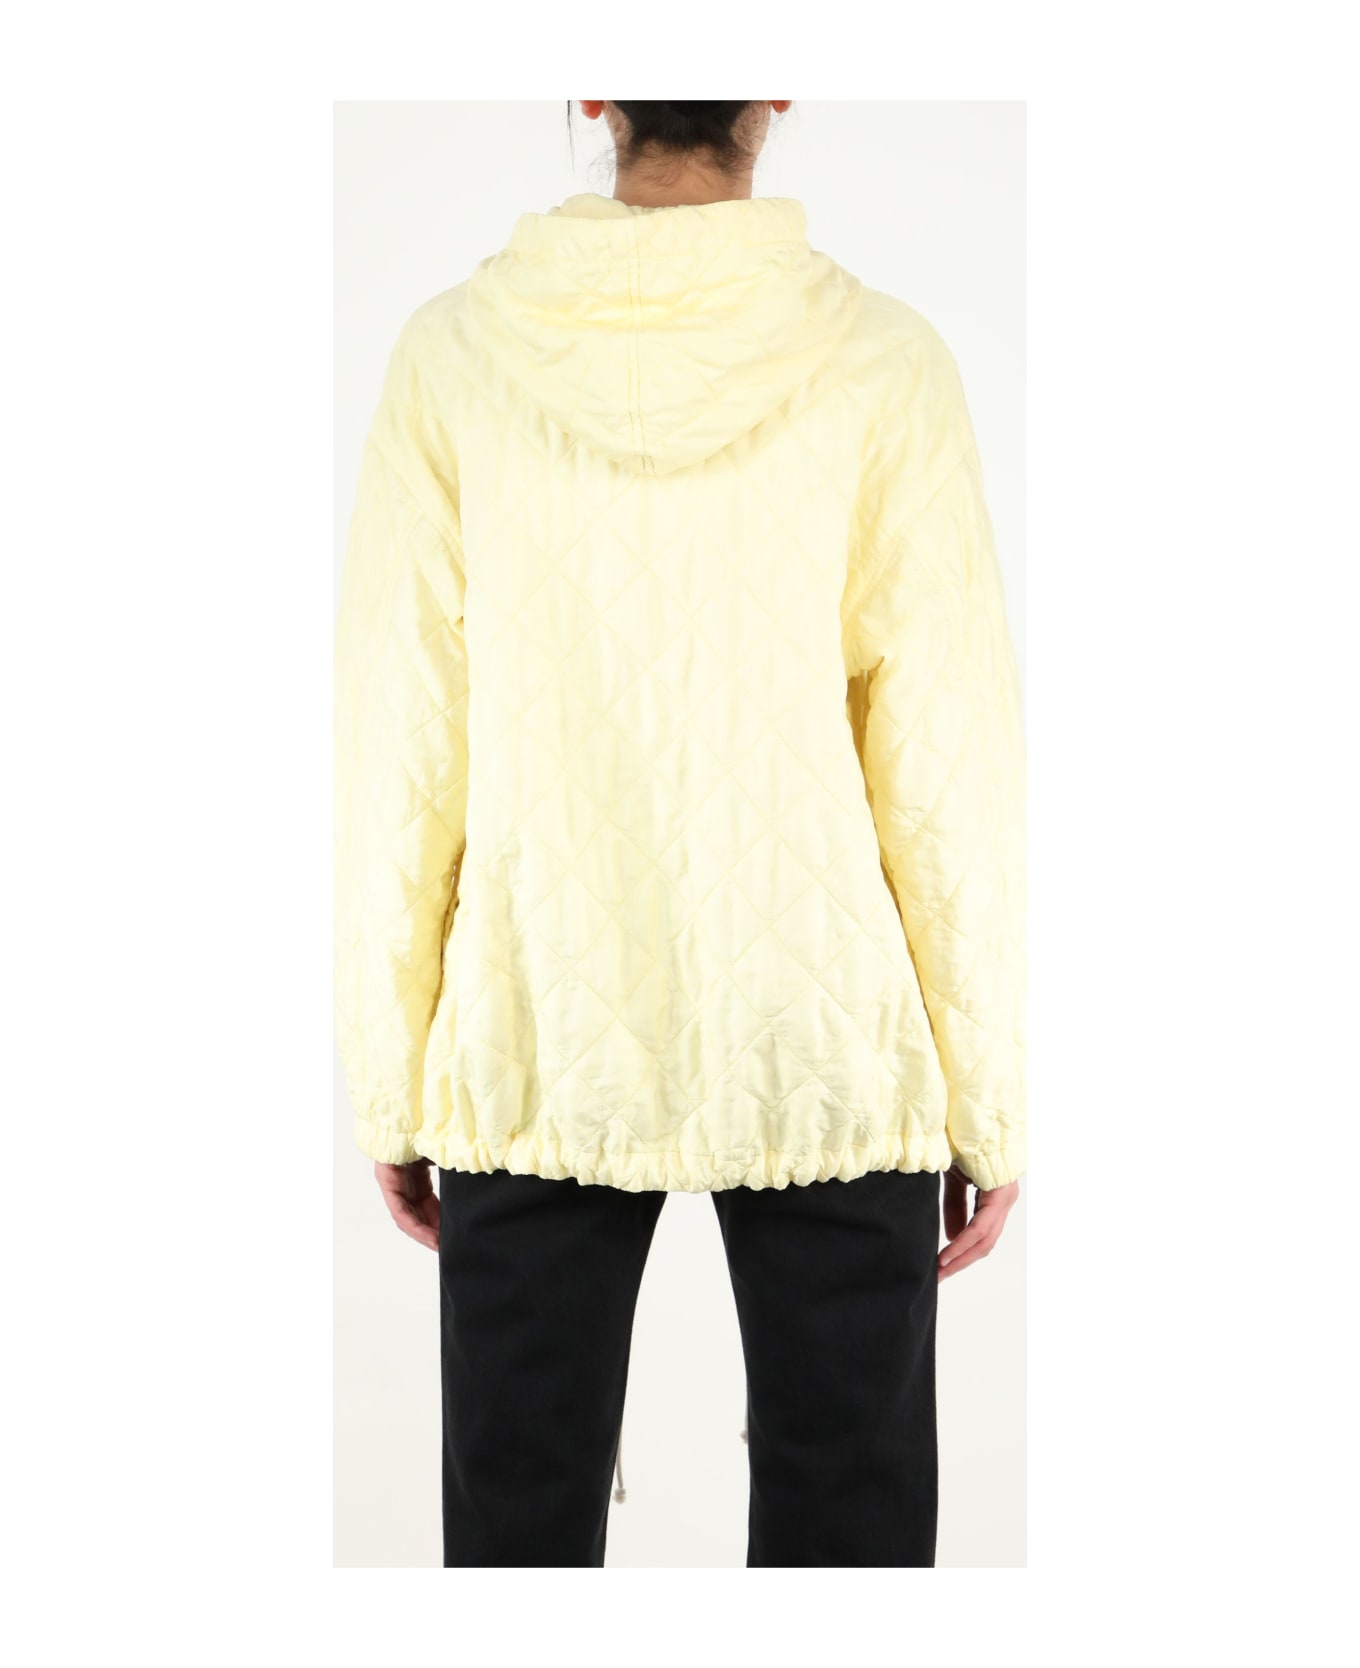 Jil Sander Yellow Quilted Jacket - YELLOW ジャケット